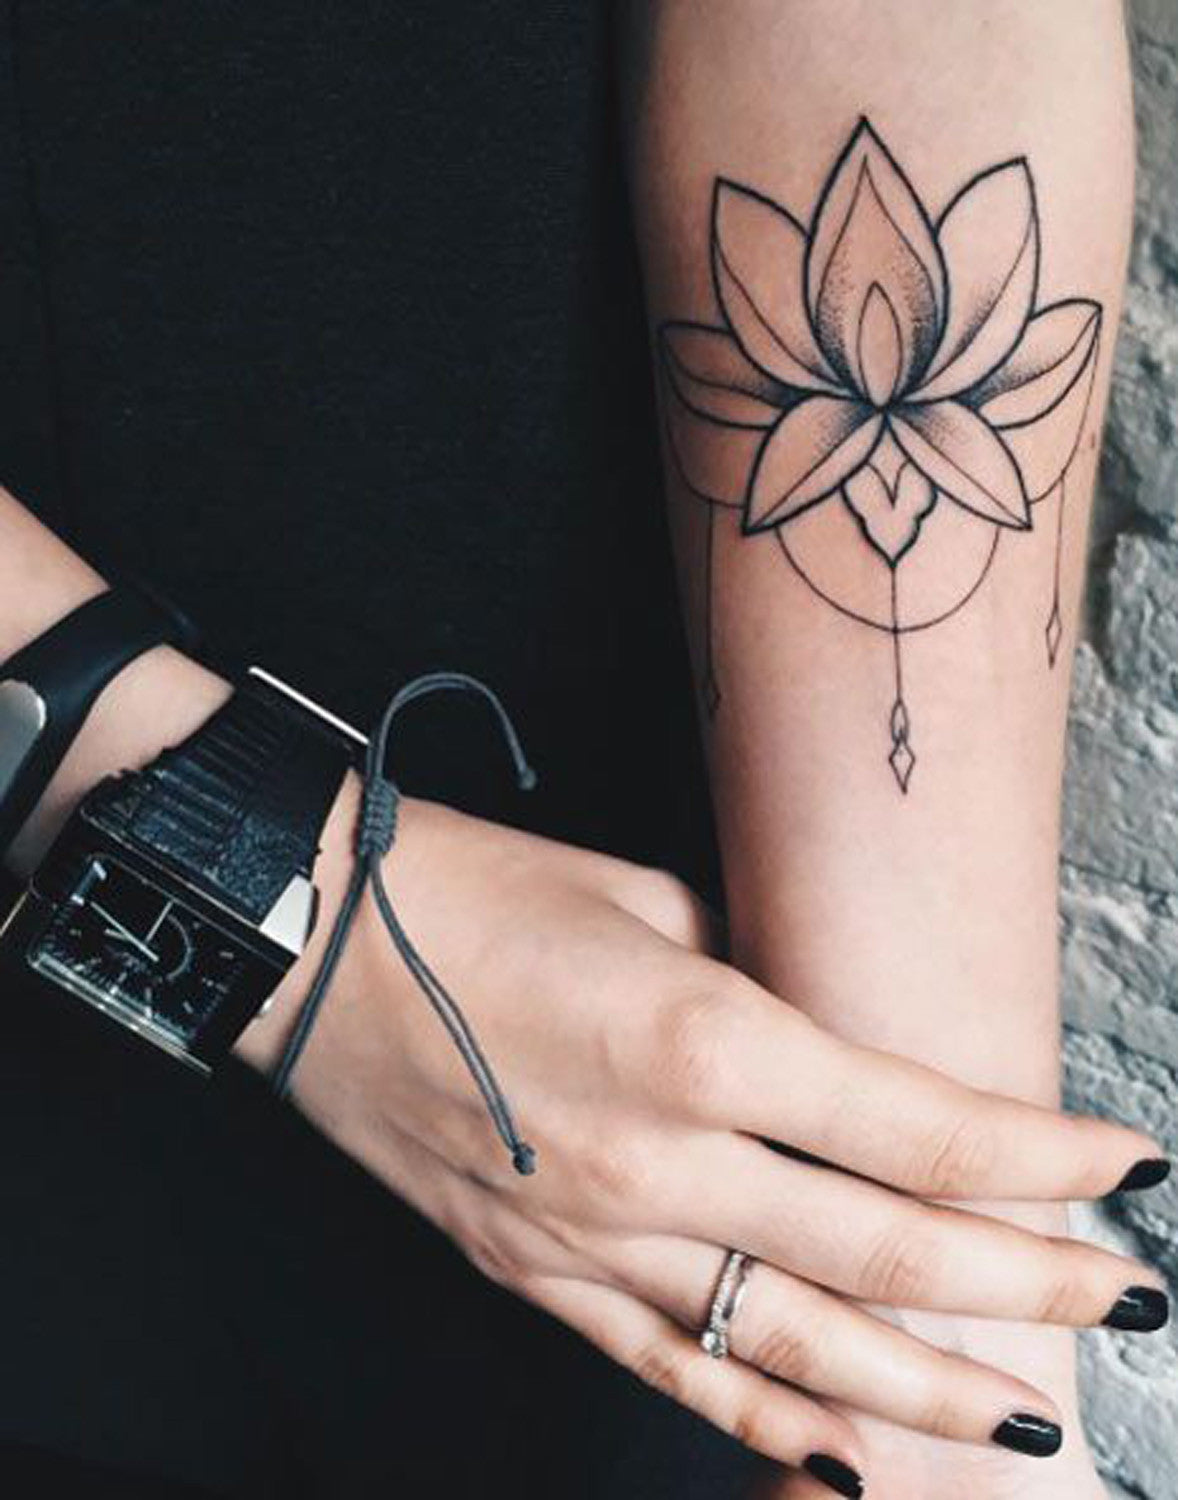 Tattoo Arm Pictures | Download Free Images on Unsplash